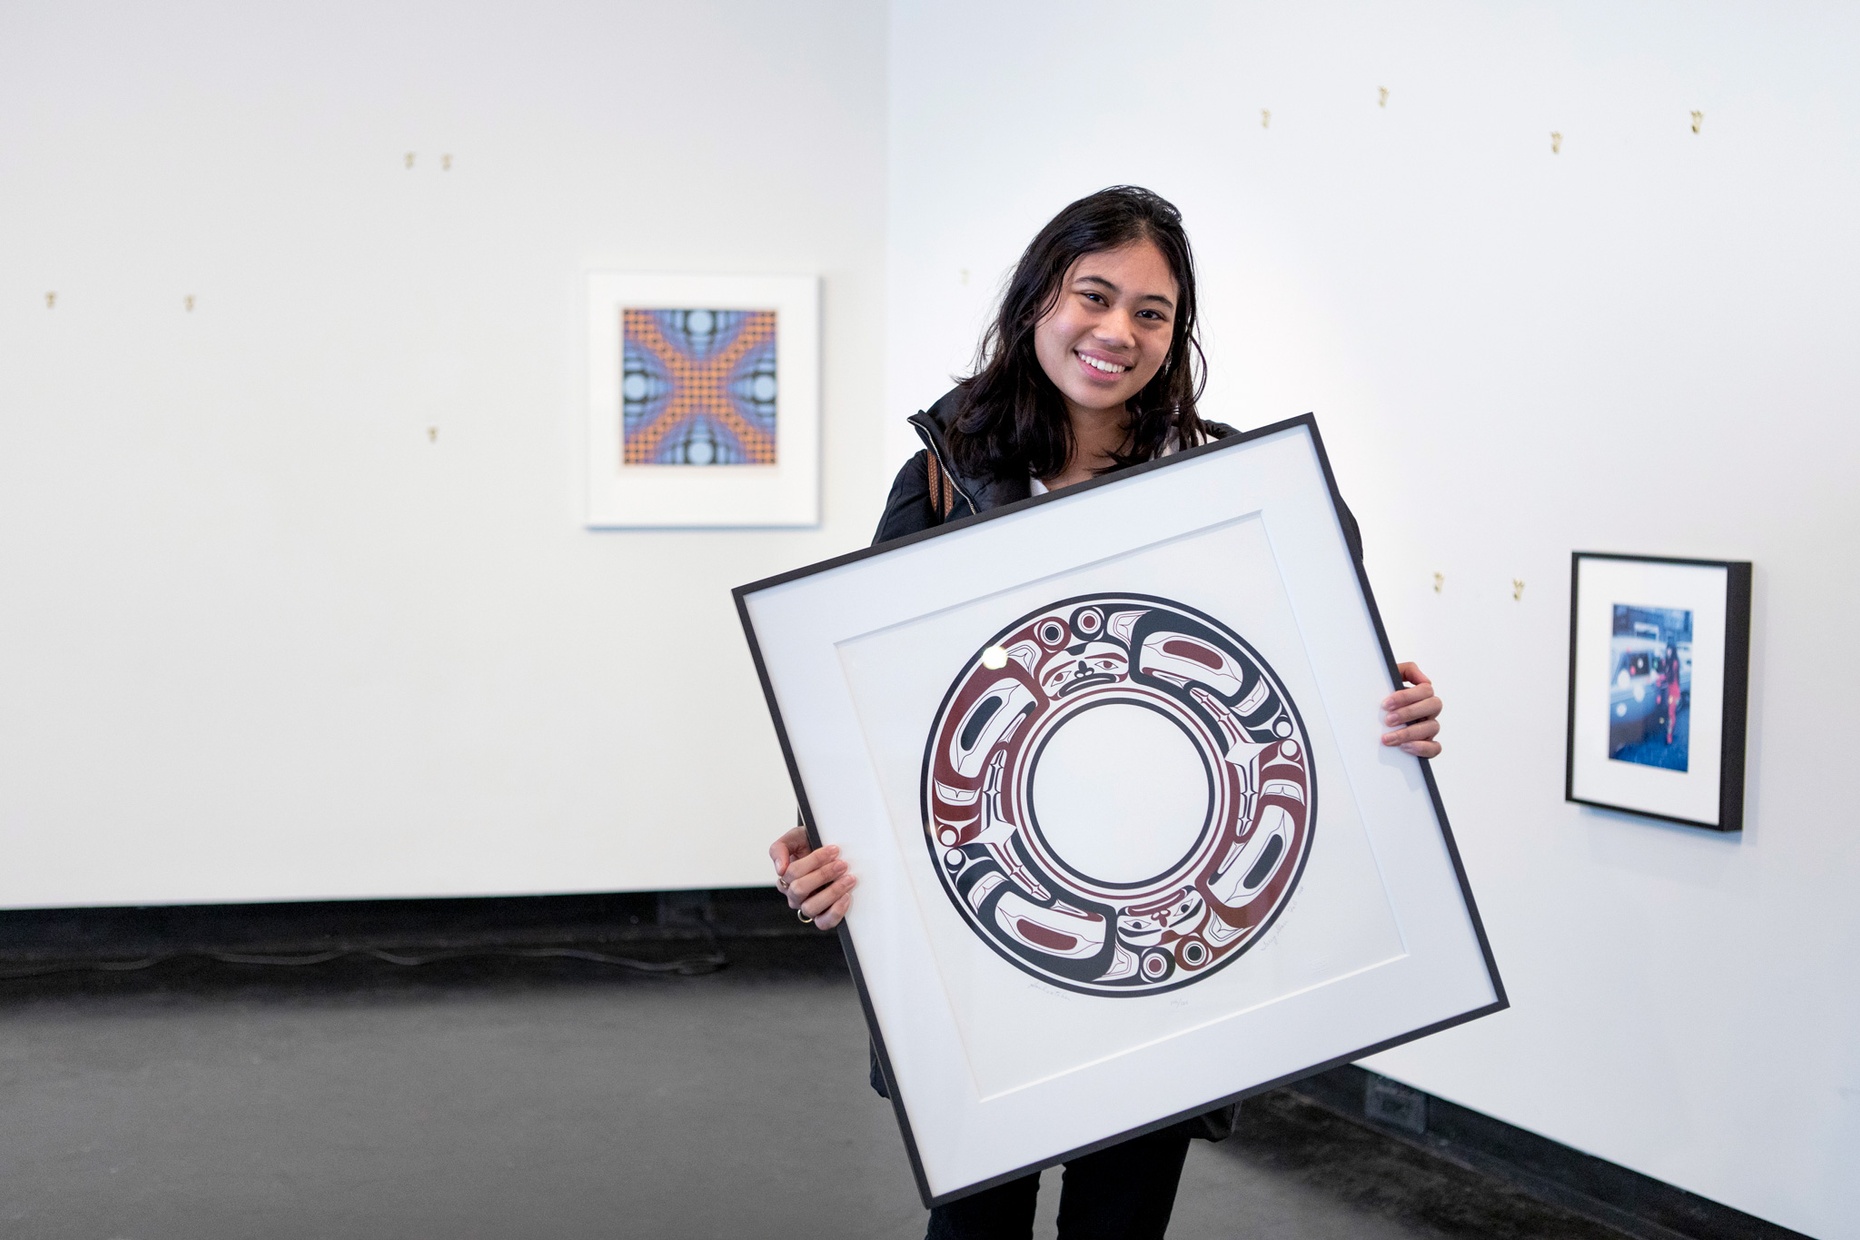 A smiling student holds a framed artwork by artist Terry Starr in her hands with two artworks hanging on the wall behind her.